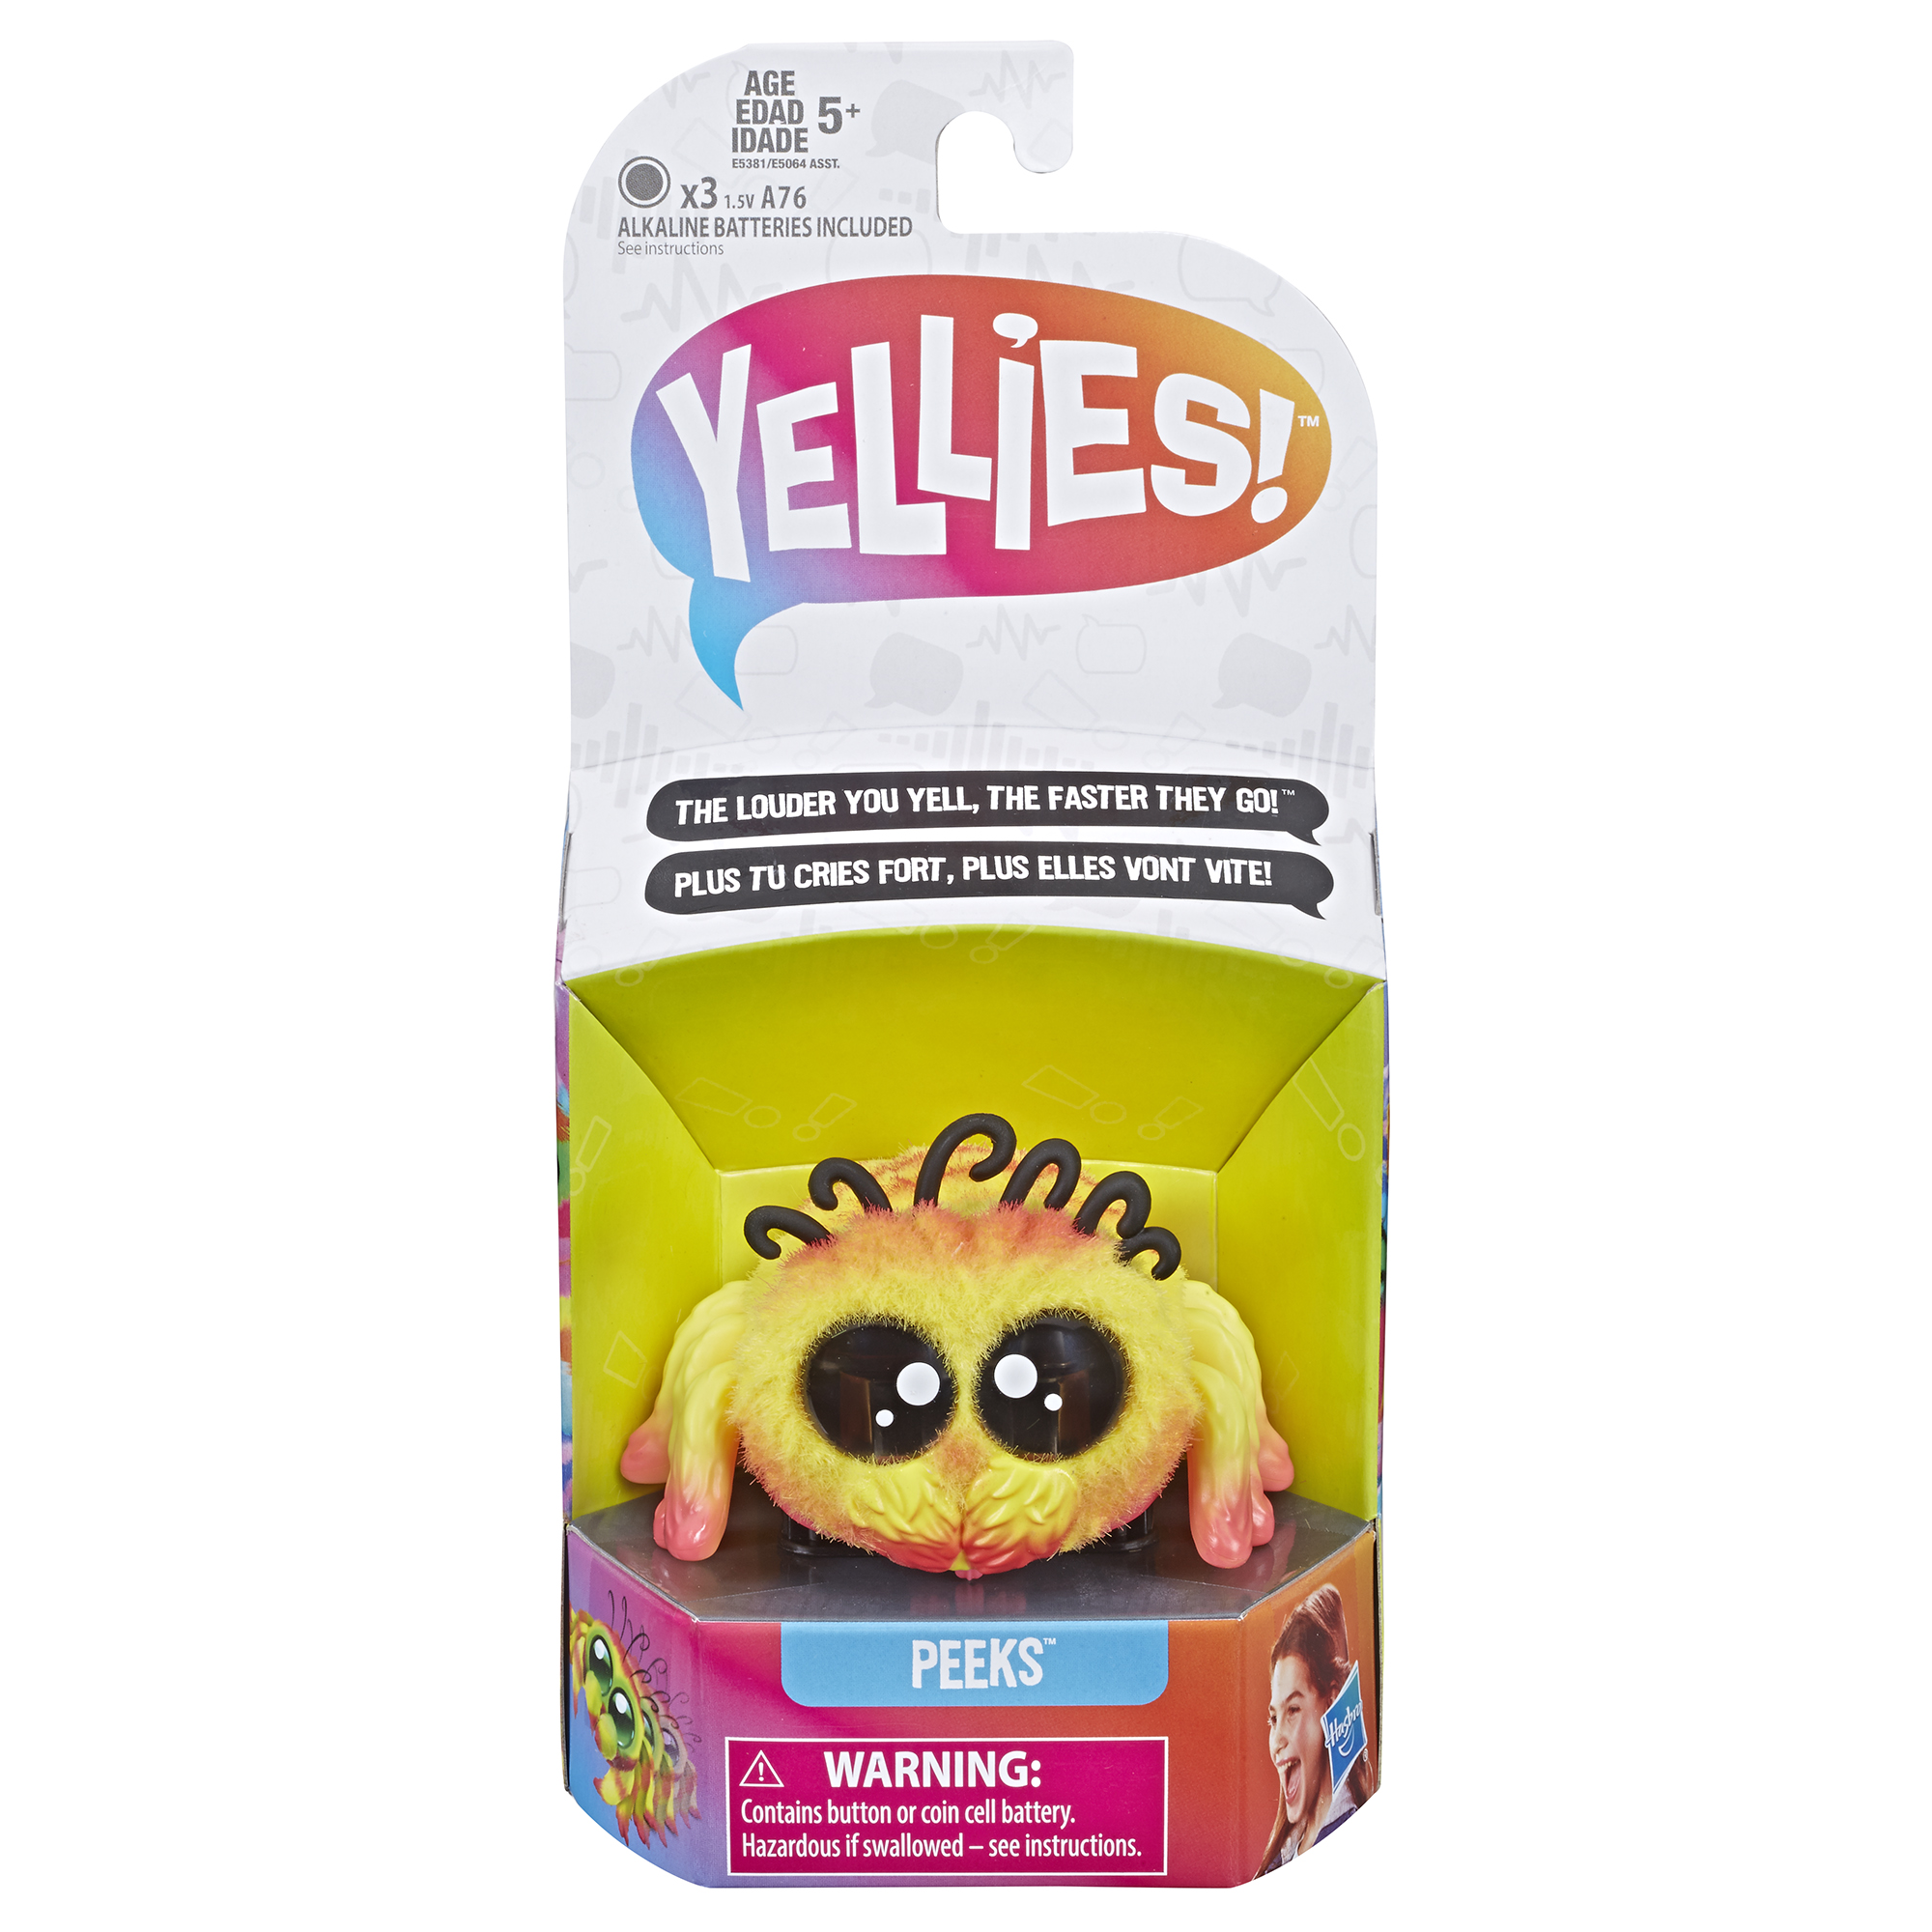 Yellies! Peeks; Voice-activated Spider Pet; Ages 5 and up - image 3 of 13